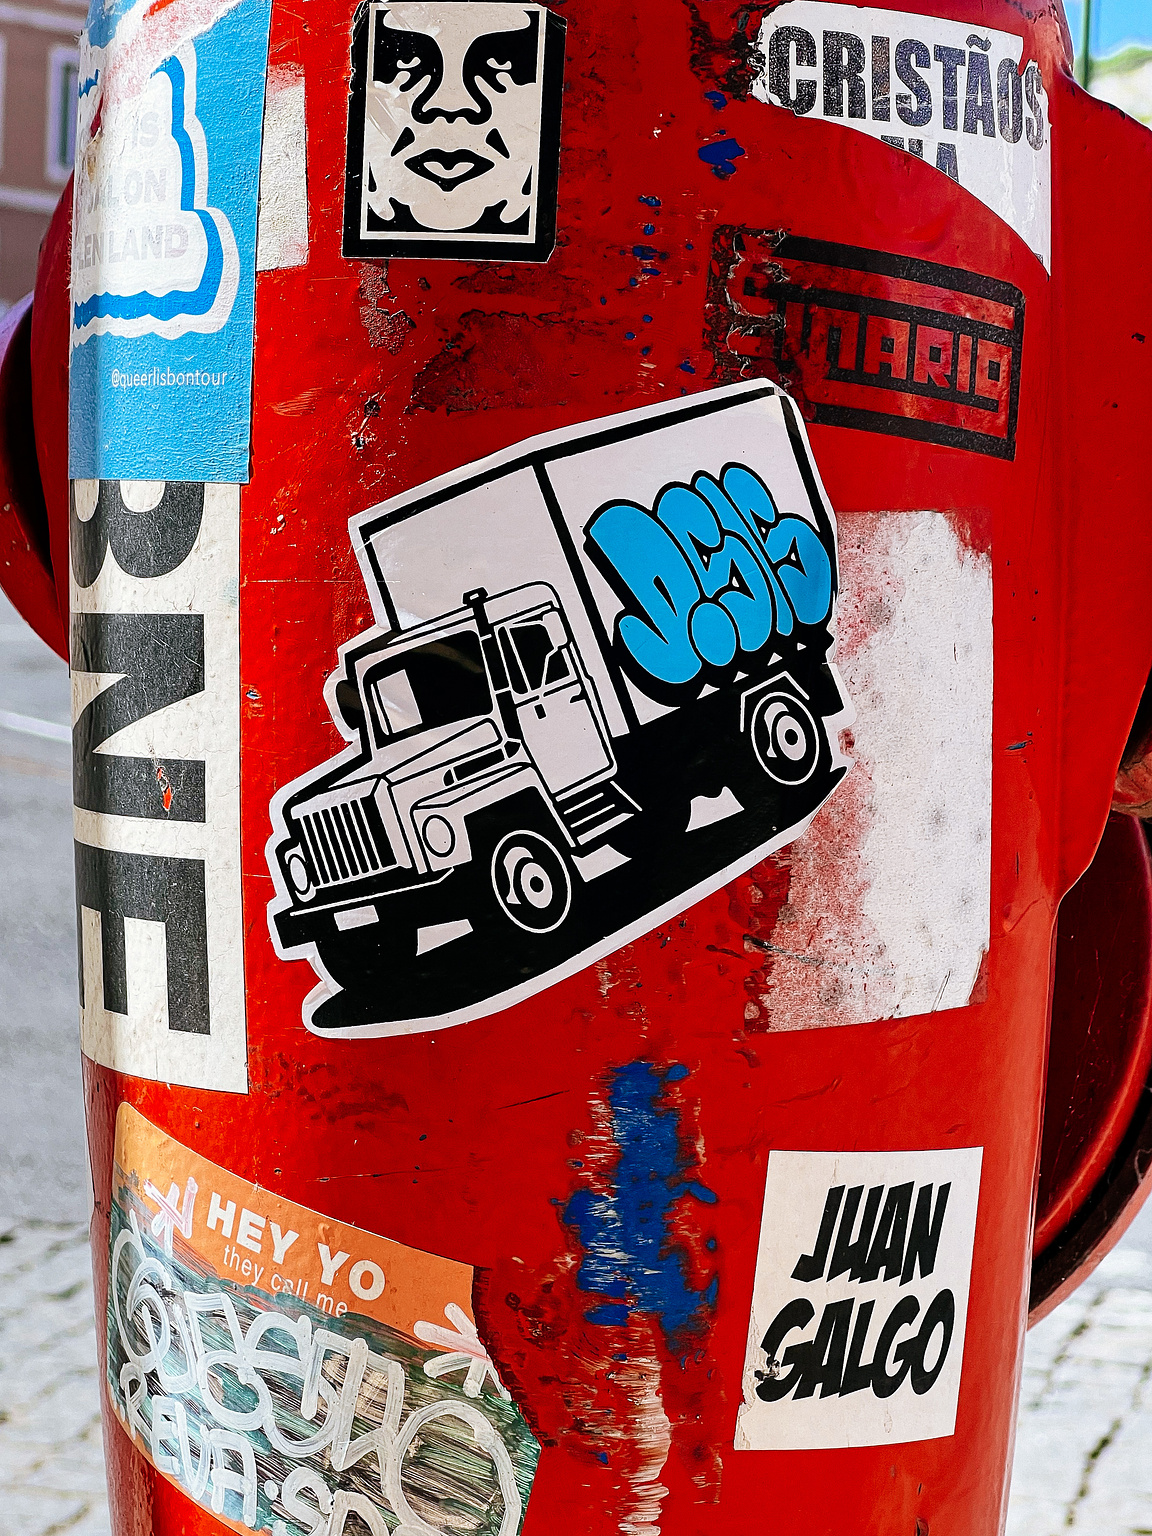 A red pole covered in various stickers, some depicting vehicles and faces, amidst urban surroundings.